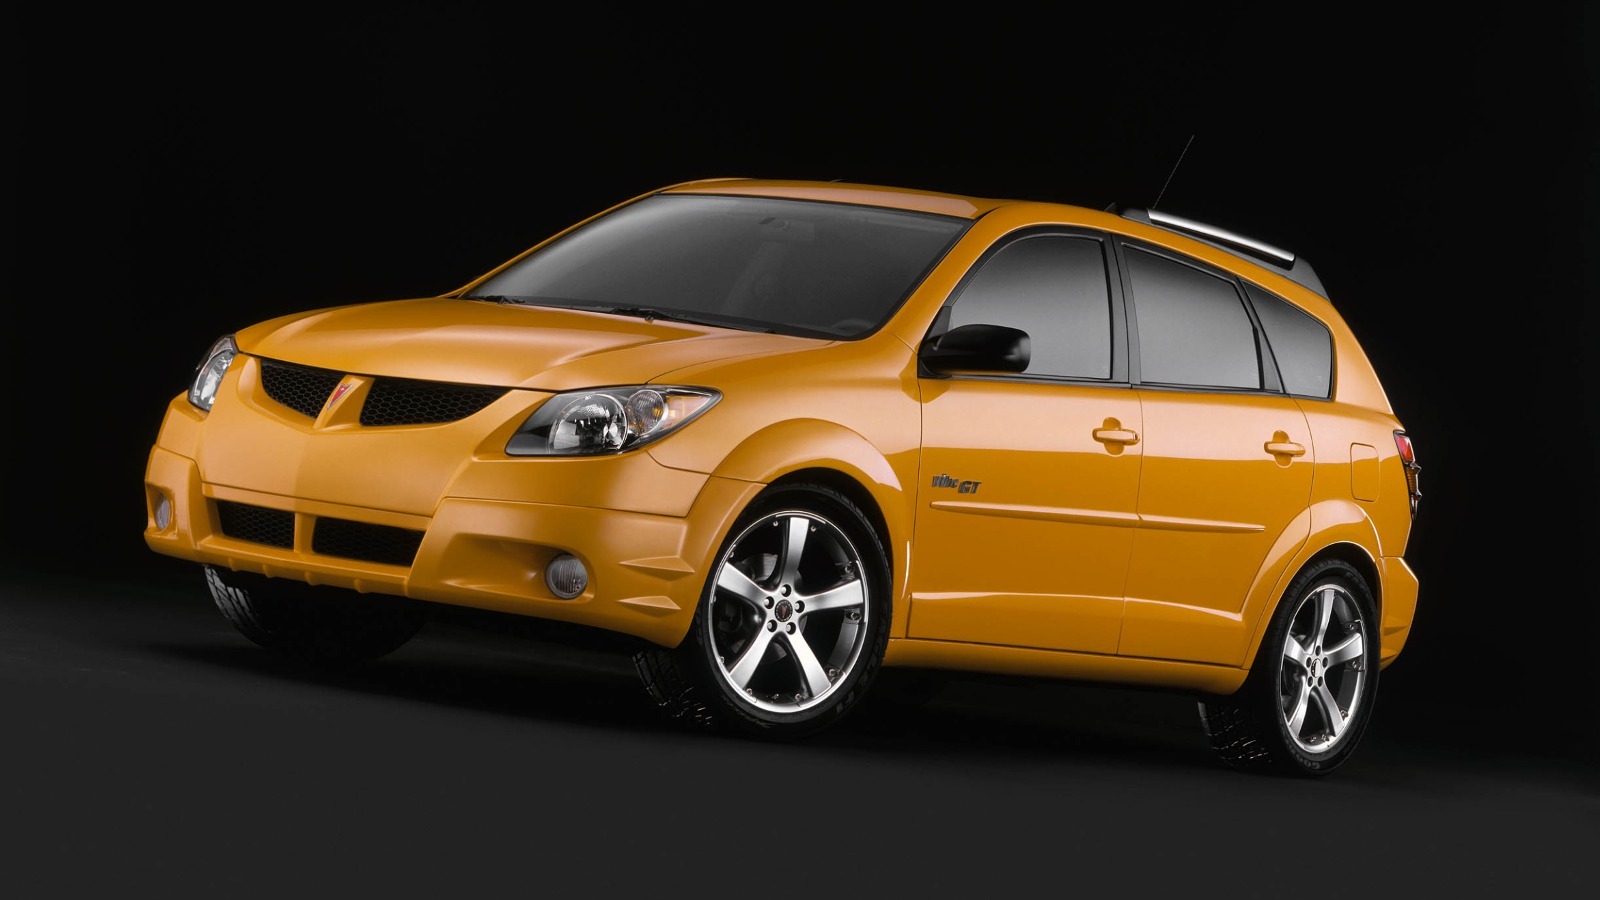 The Best Years For Pontiac Vibe (And Some To Avoid)